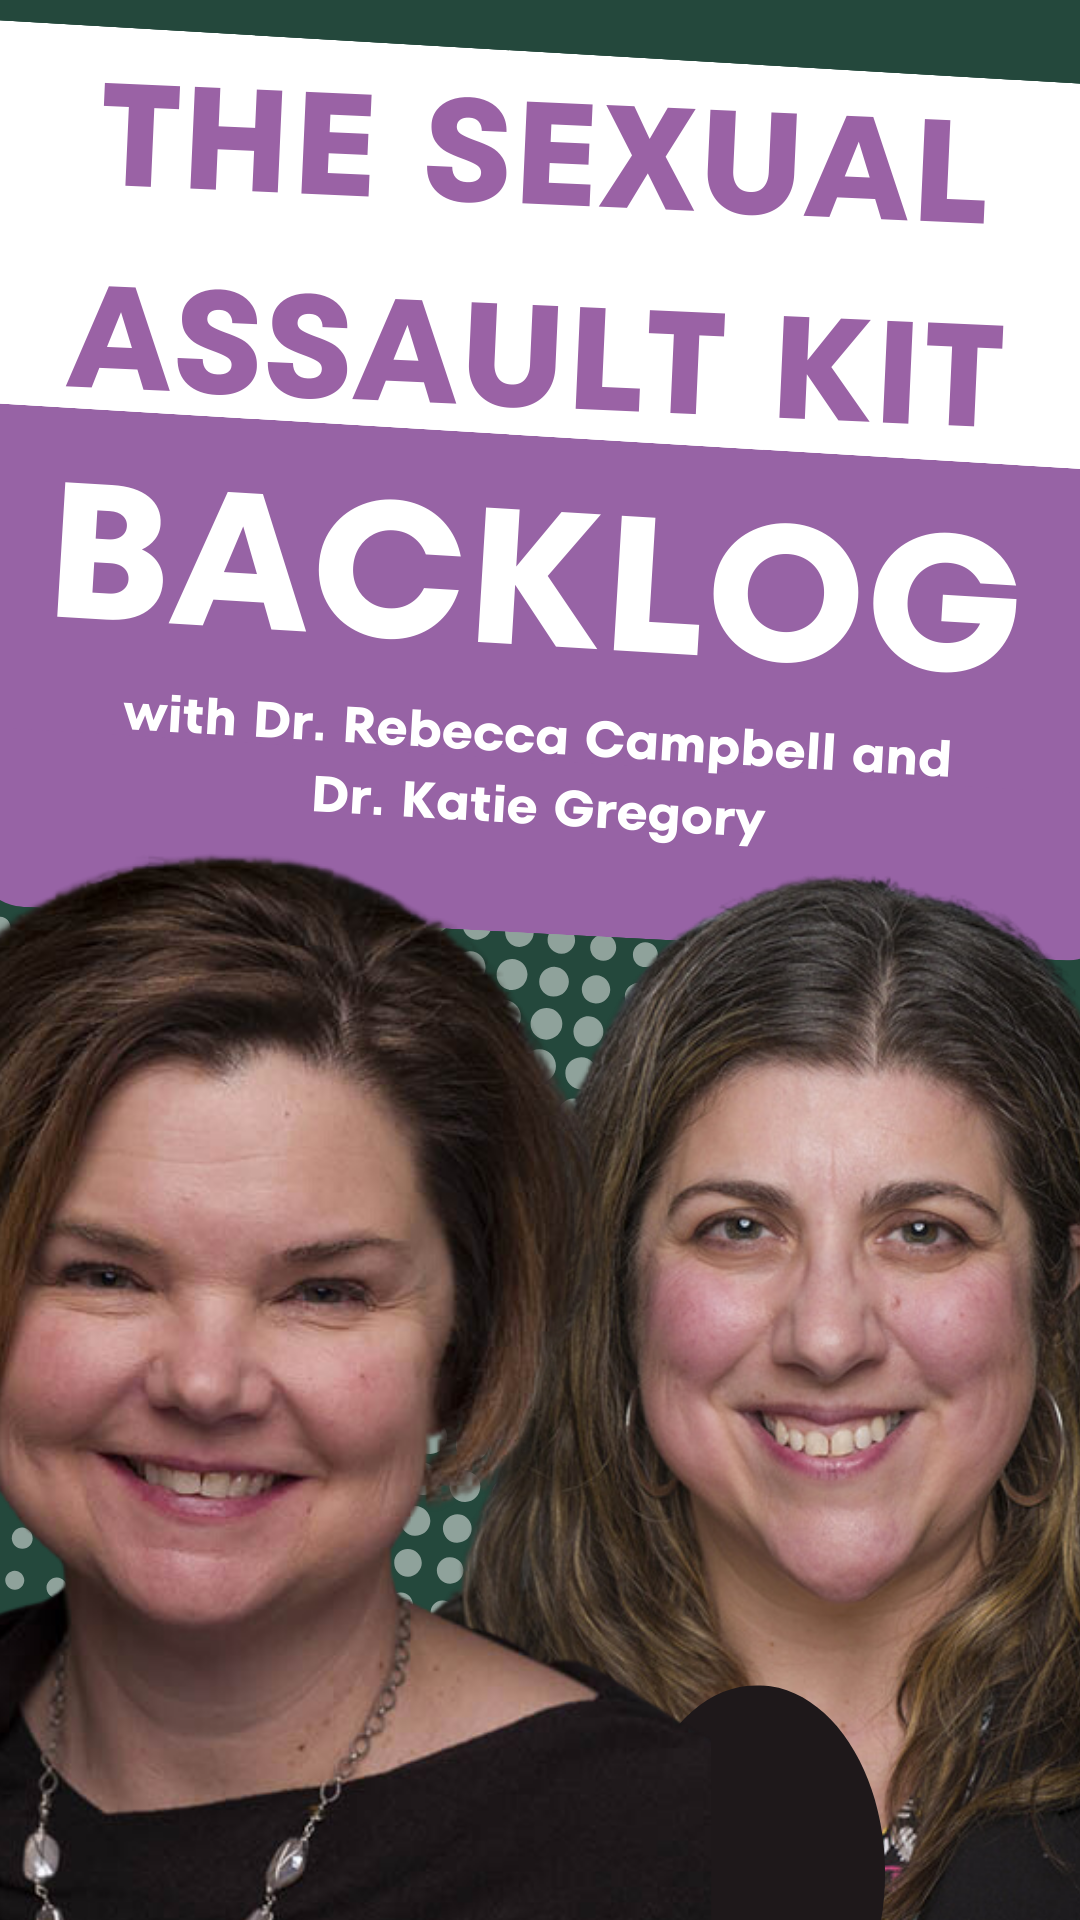 Sexual Assault Kit Backlog with Dr. Rebecca Campbell and Dr. Katie Gregory